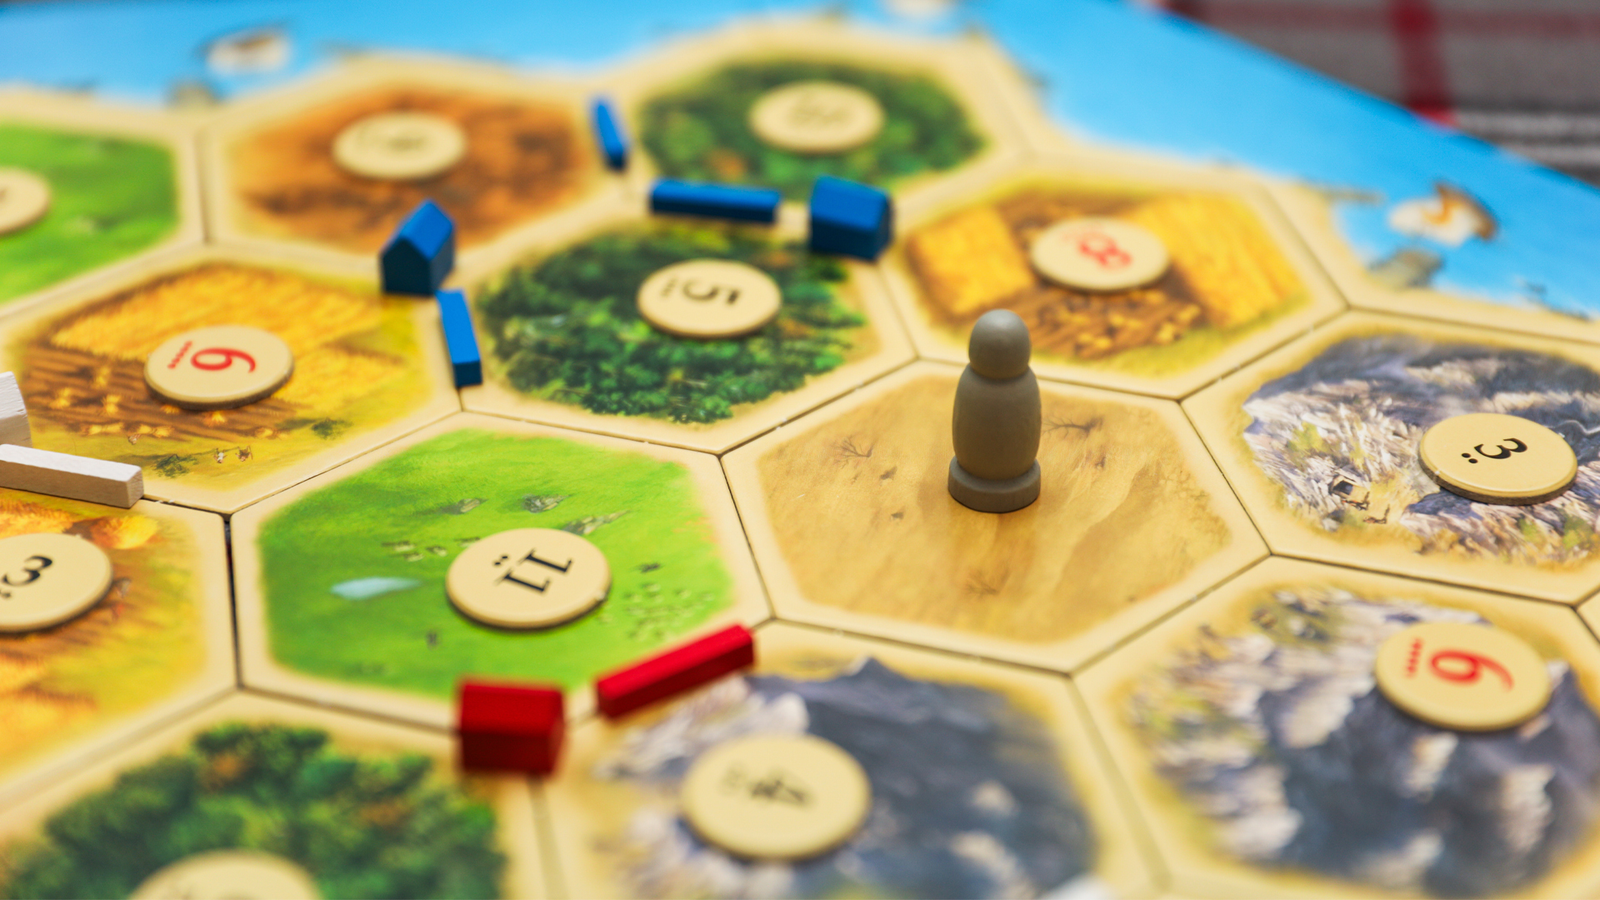 Catan for Beginners: A Guide to Basic Strategies for the Game